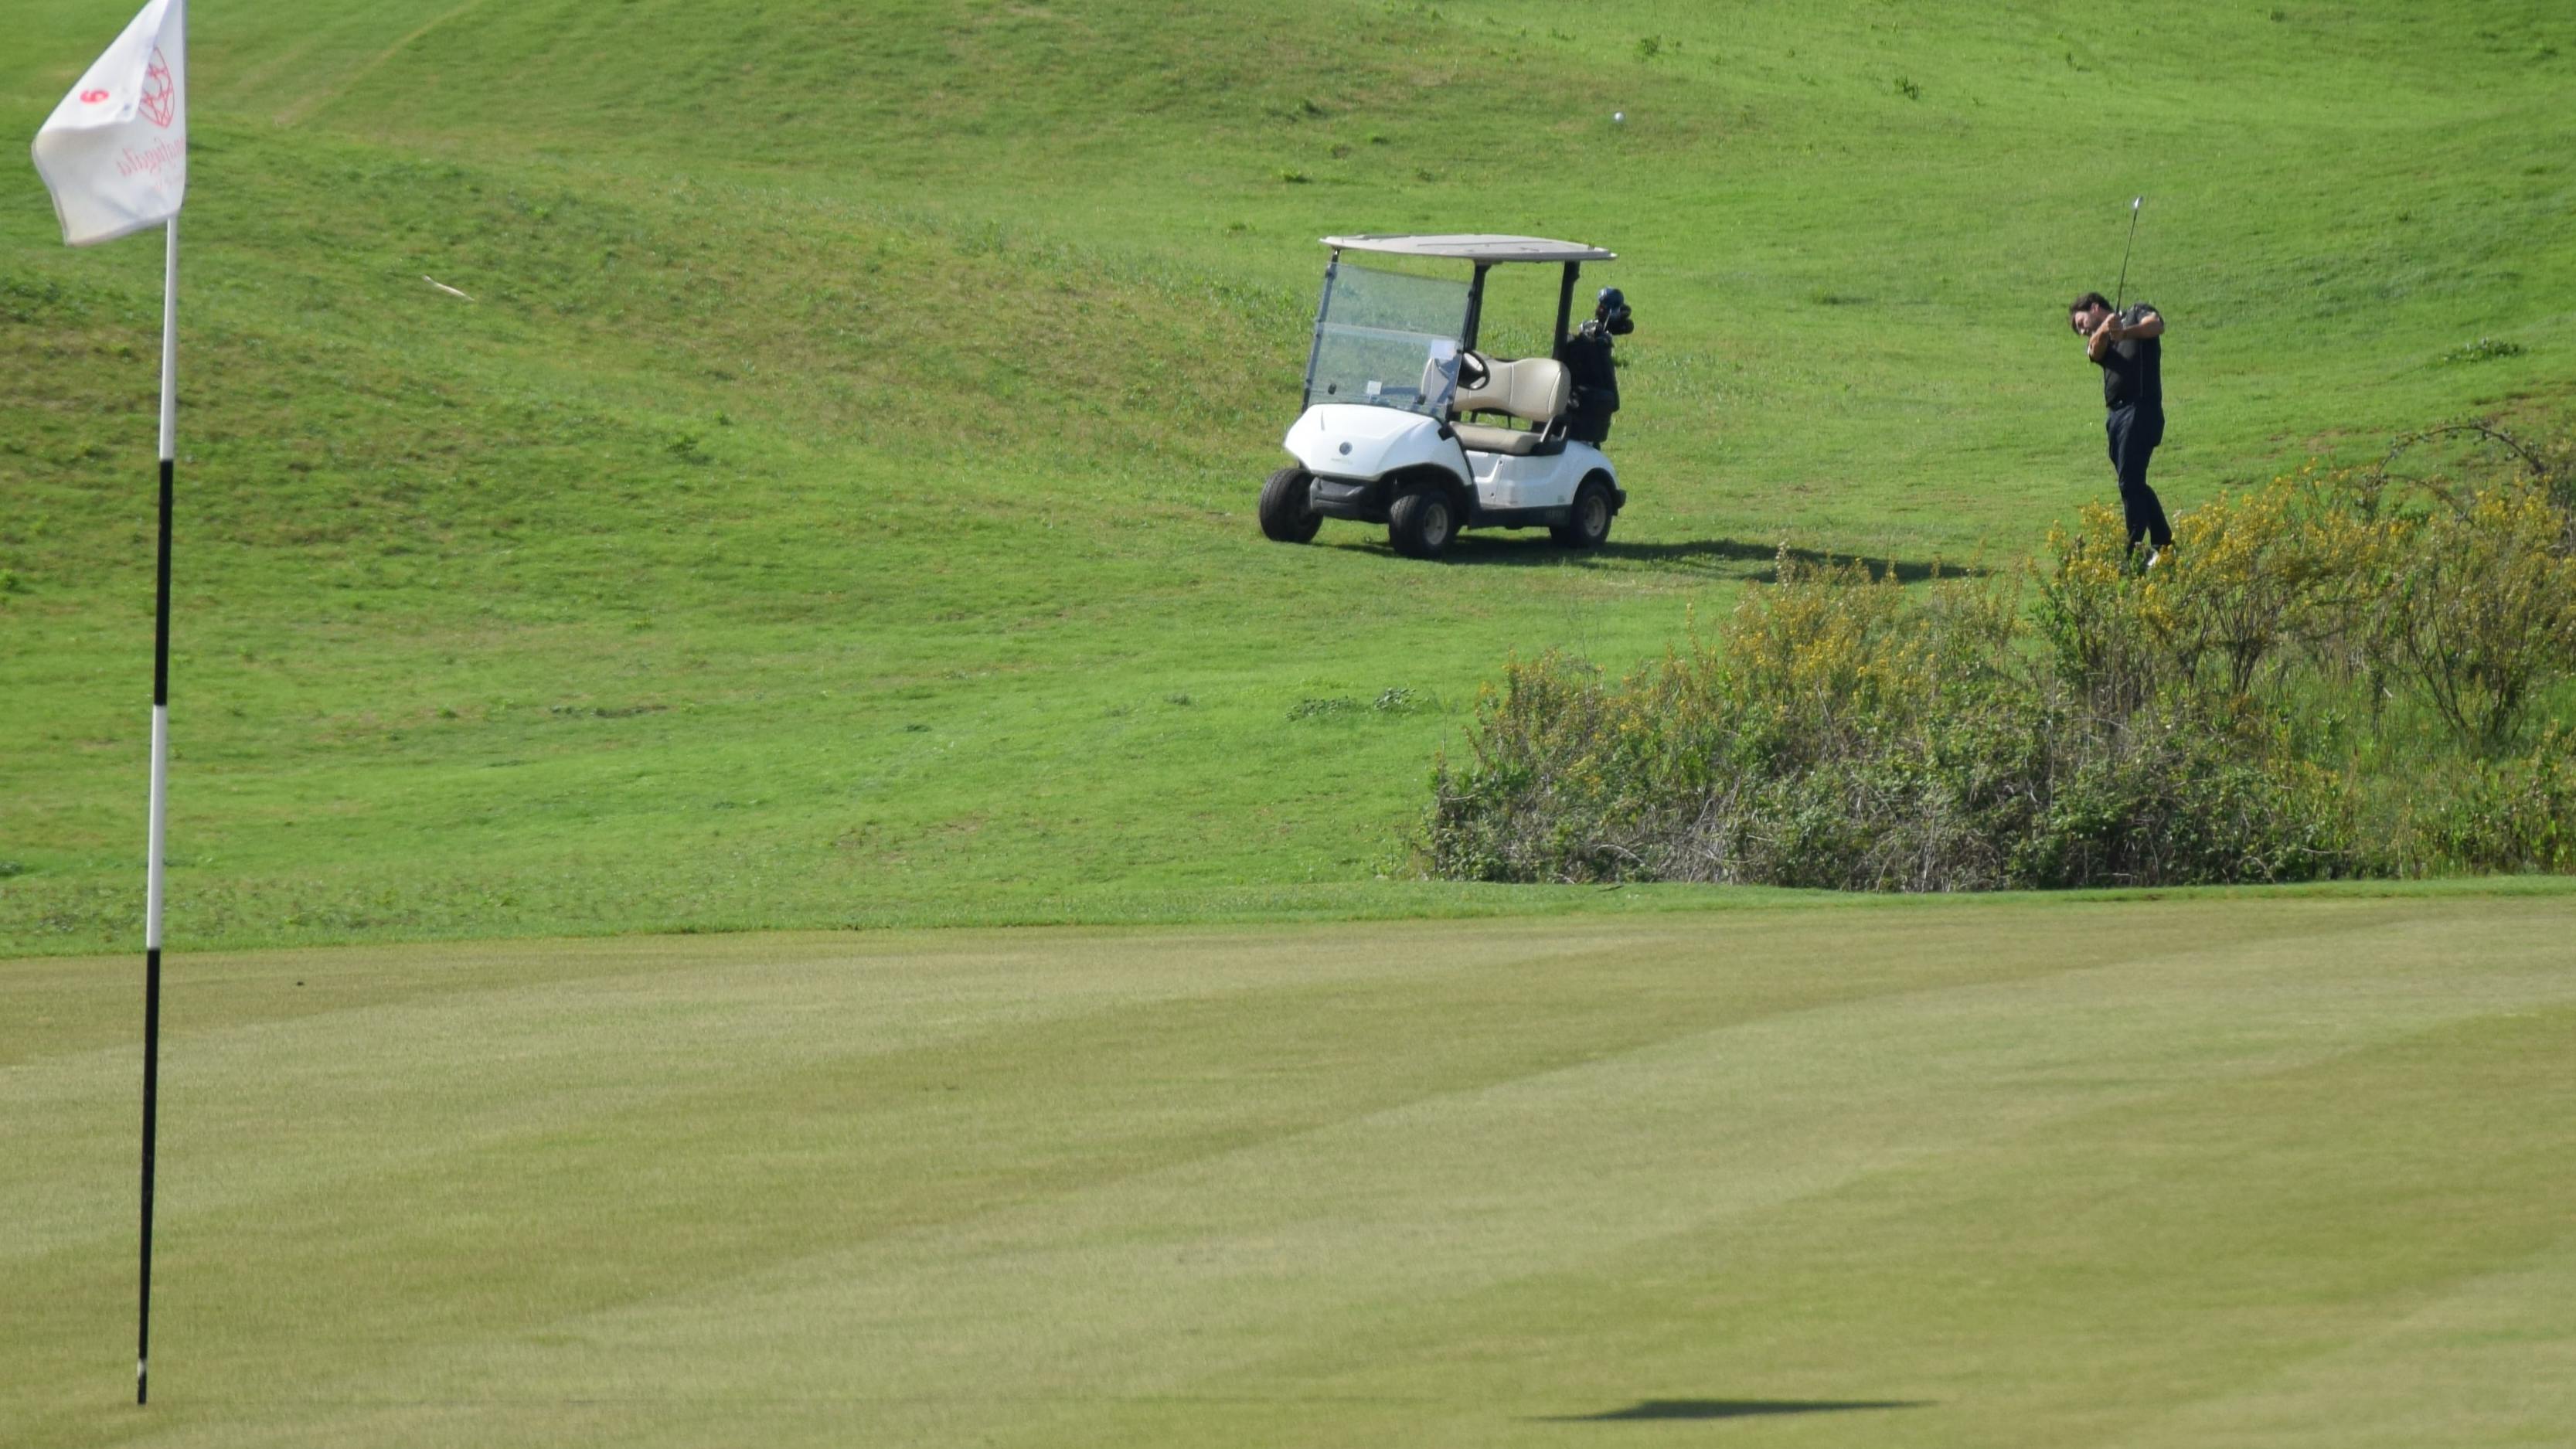 A golfer takes a swing towards the pin. His golf cart is behind him.